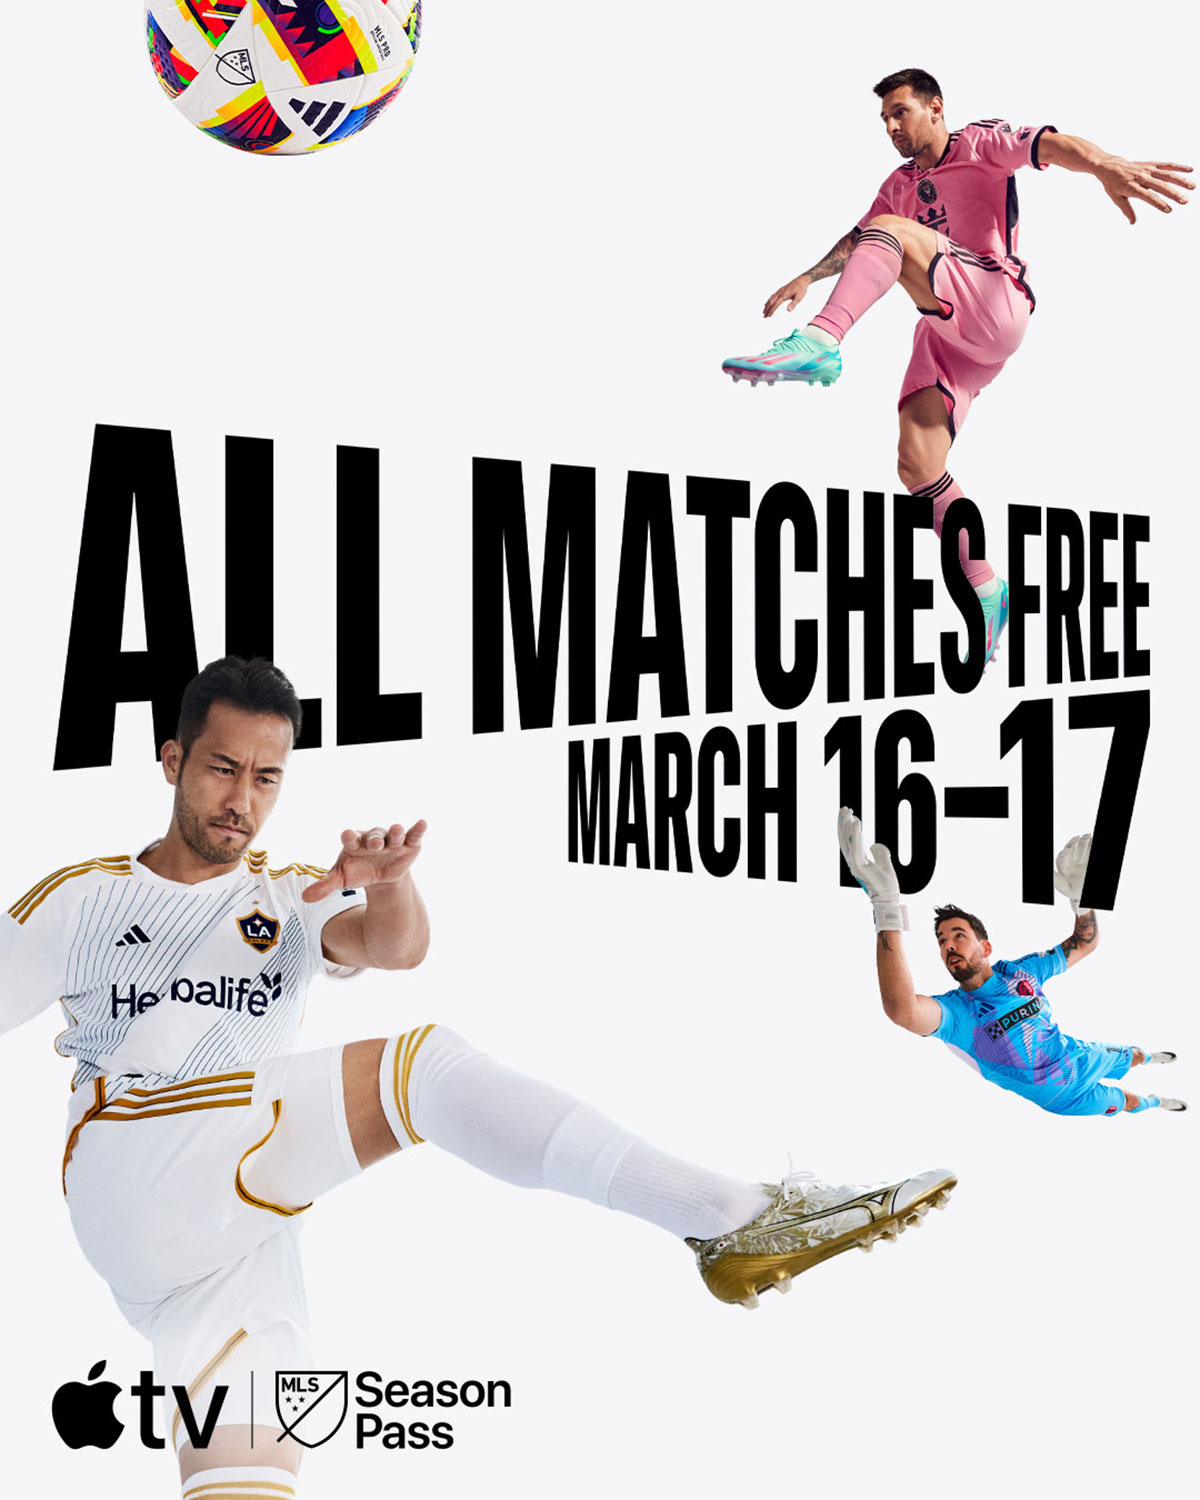 All matches free March 16-17